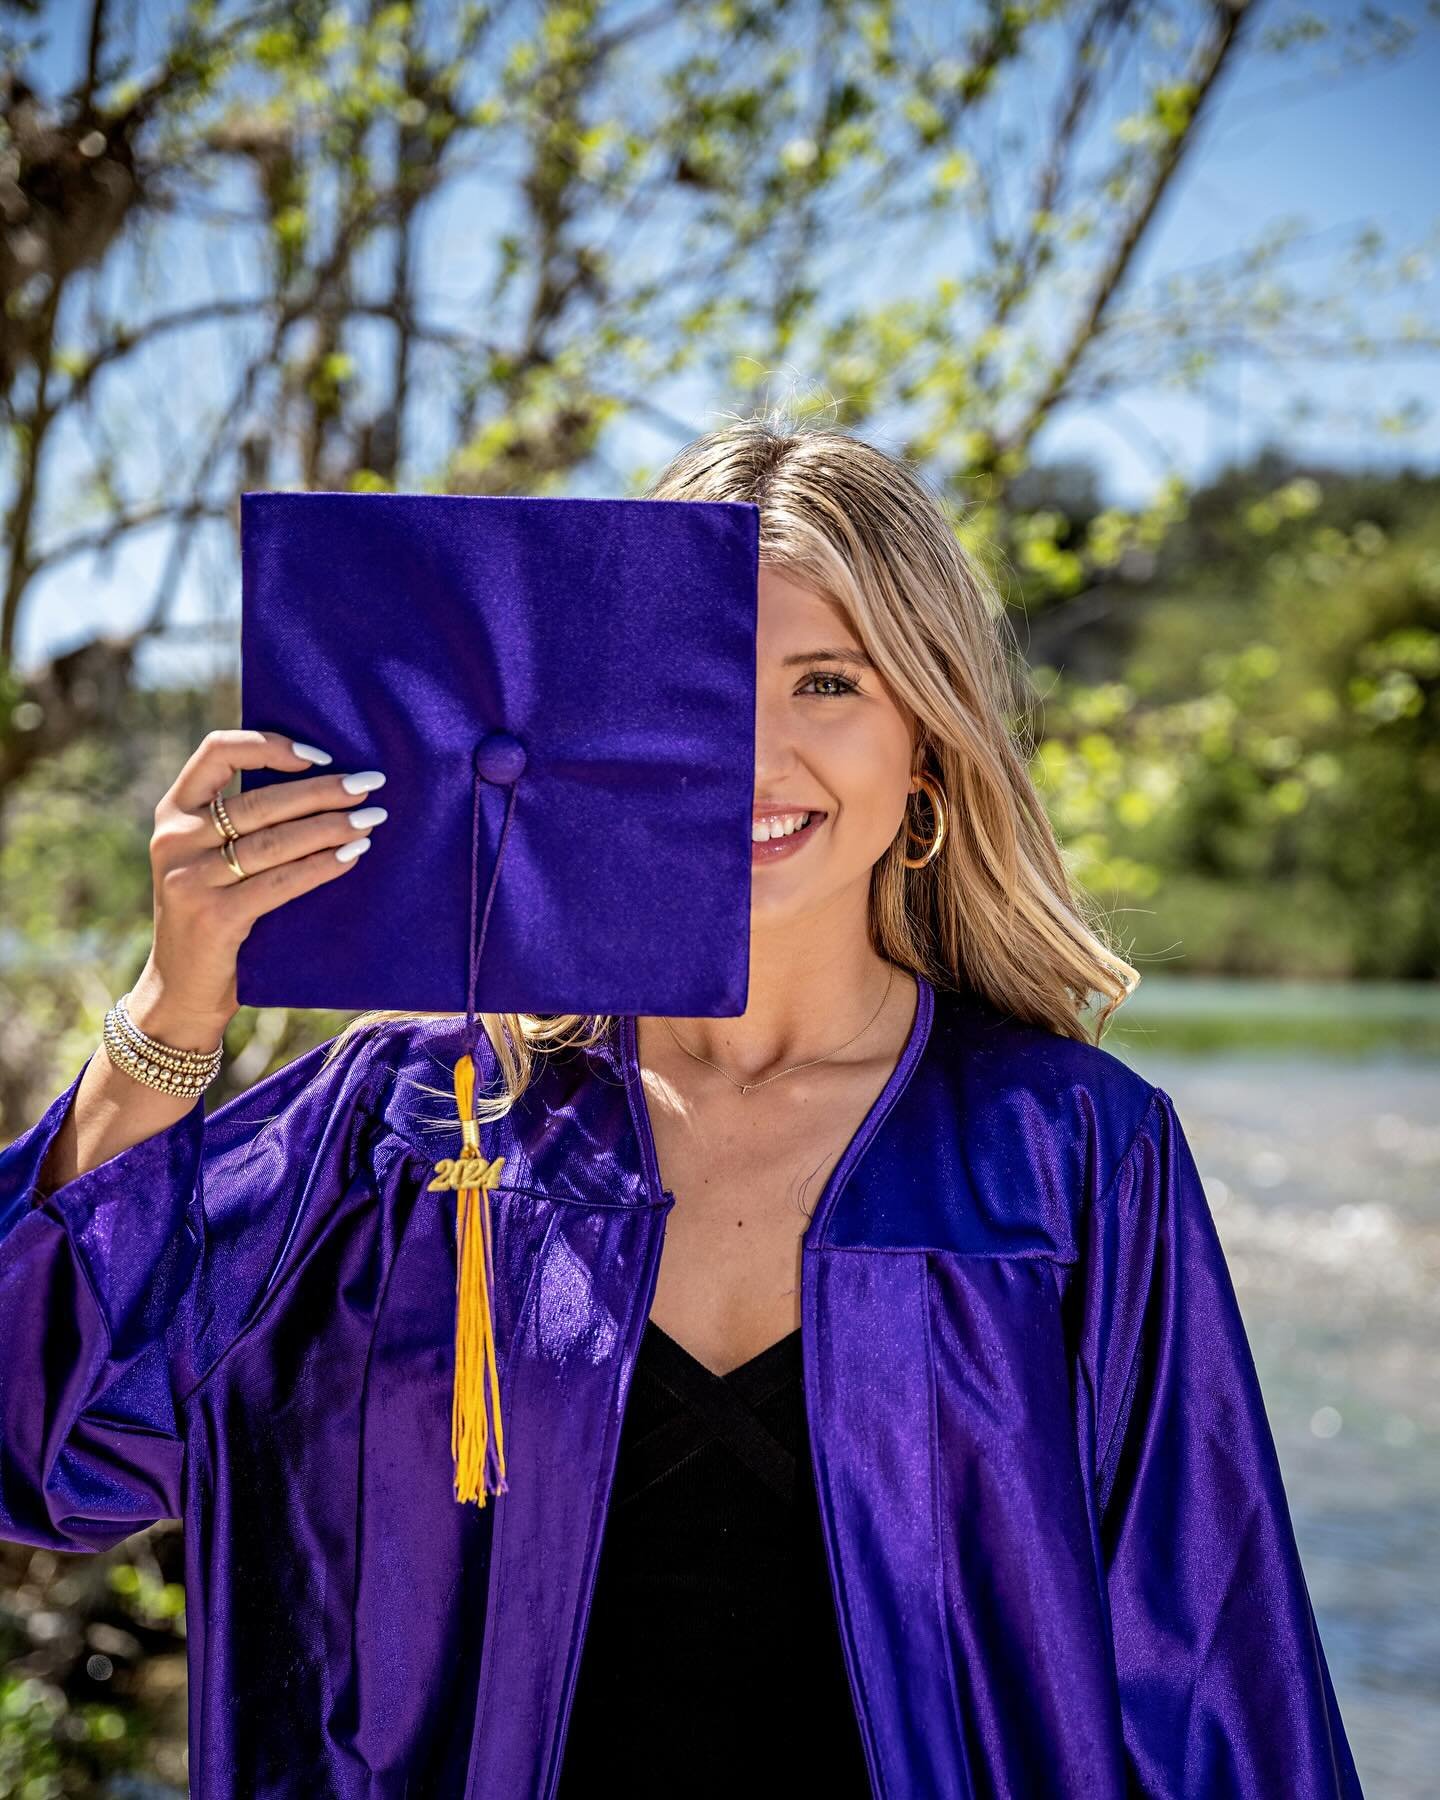 Anybody know what time it is?! Oh yeah!! It&rsquo;s almost time to Graduate! So much joy photographing this Class of 2024 beauty! 
.
.
.
#heylookmaimadeit #graduation #graduate #capandgown #classof2024 #senioryearmagezine #posepatch #shineon